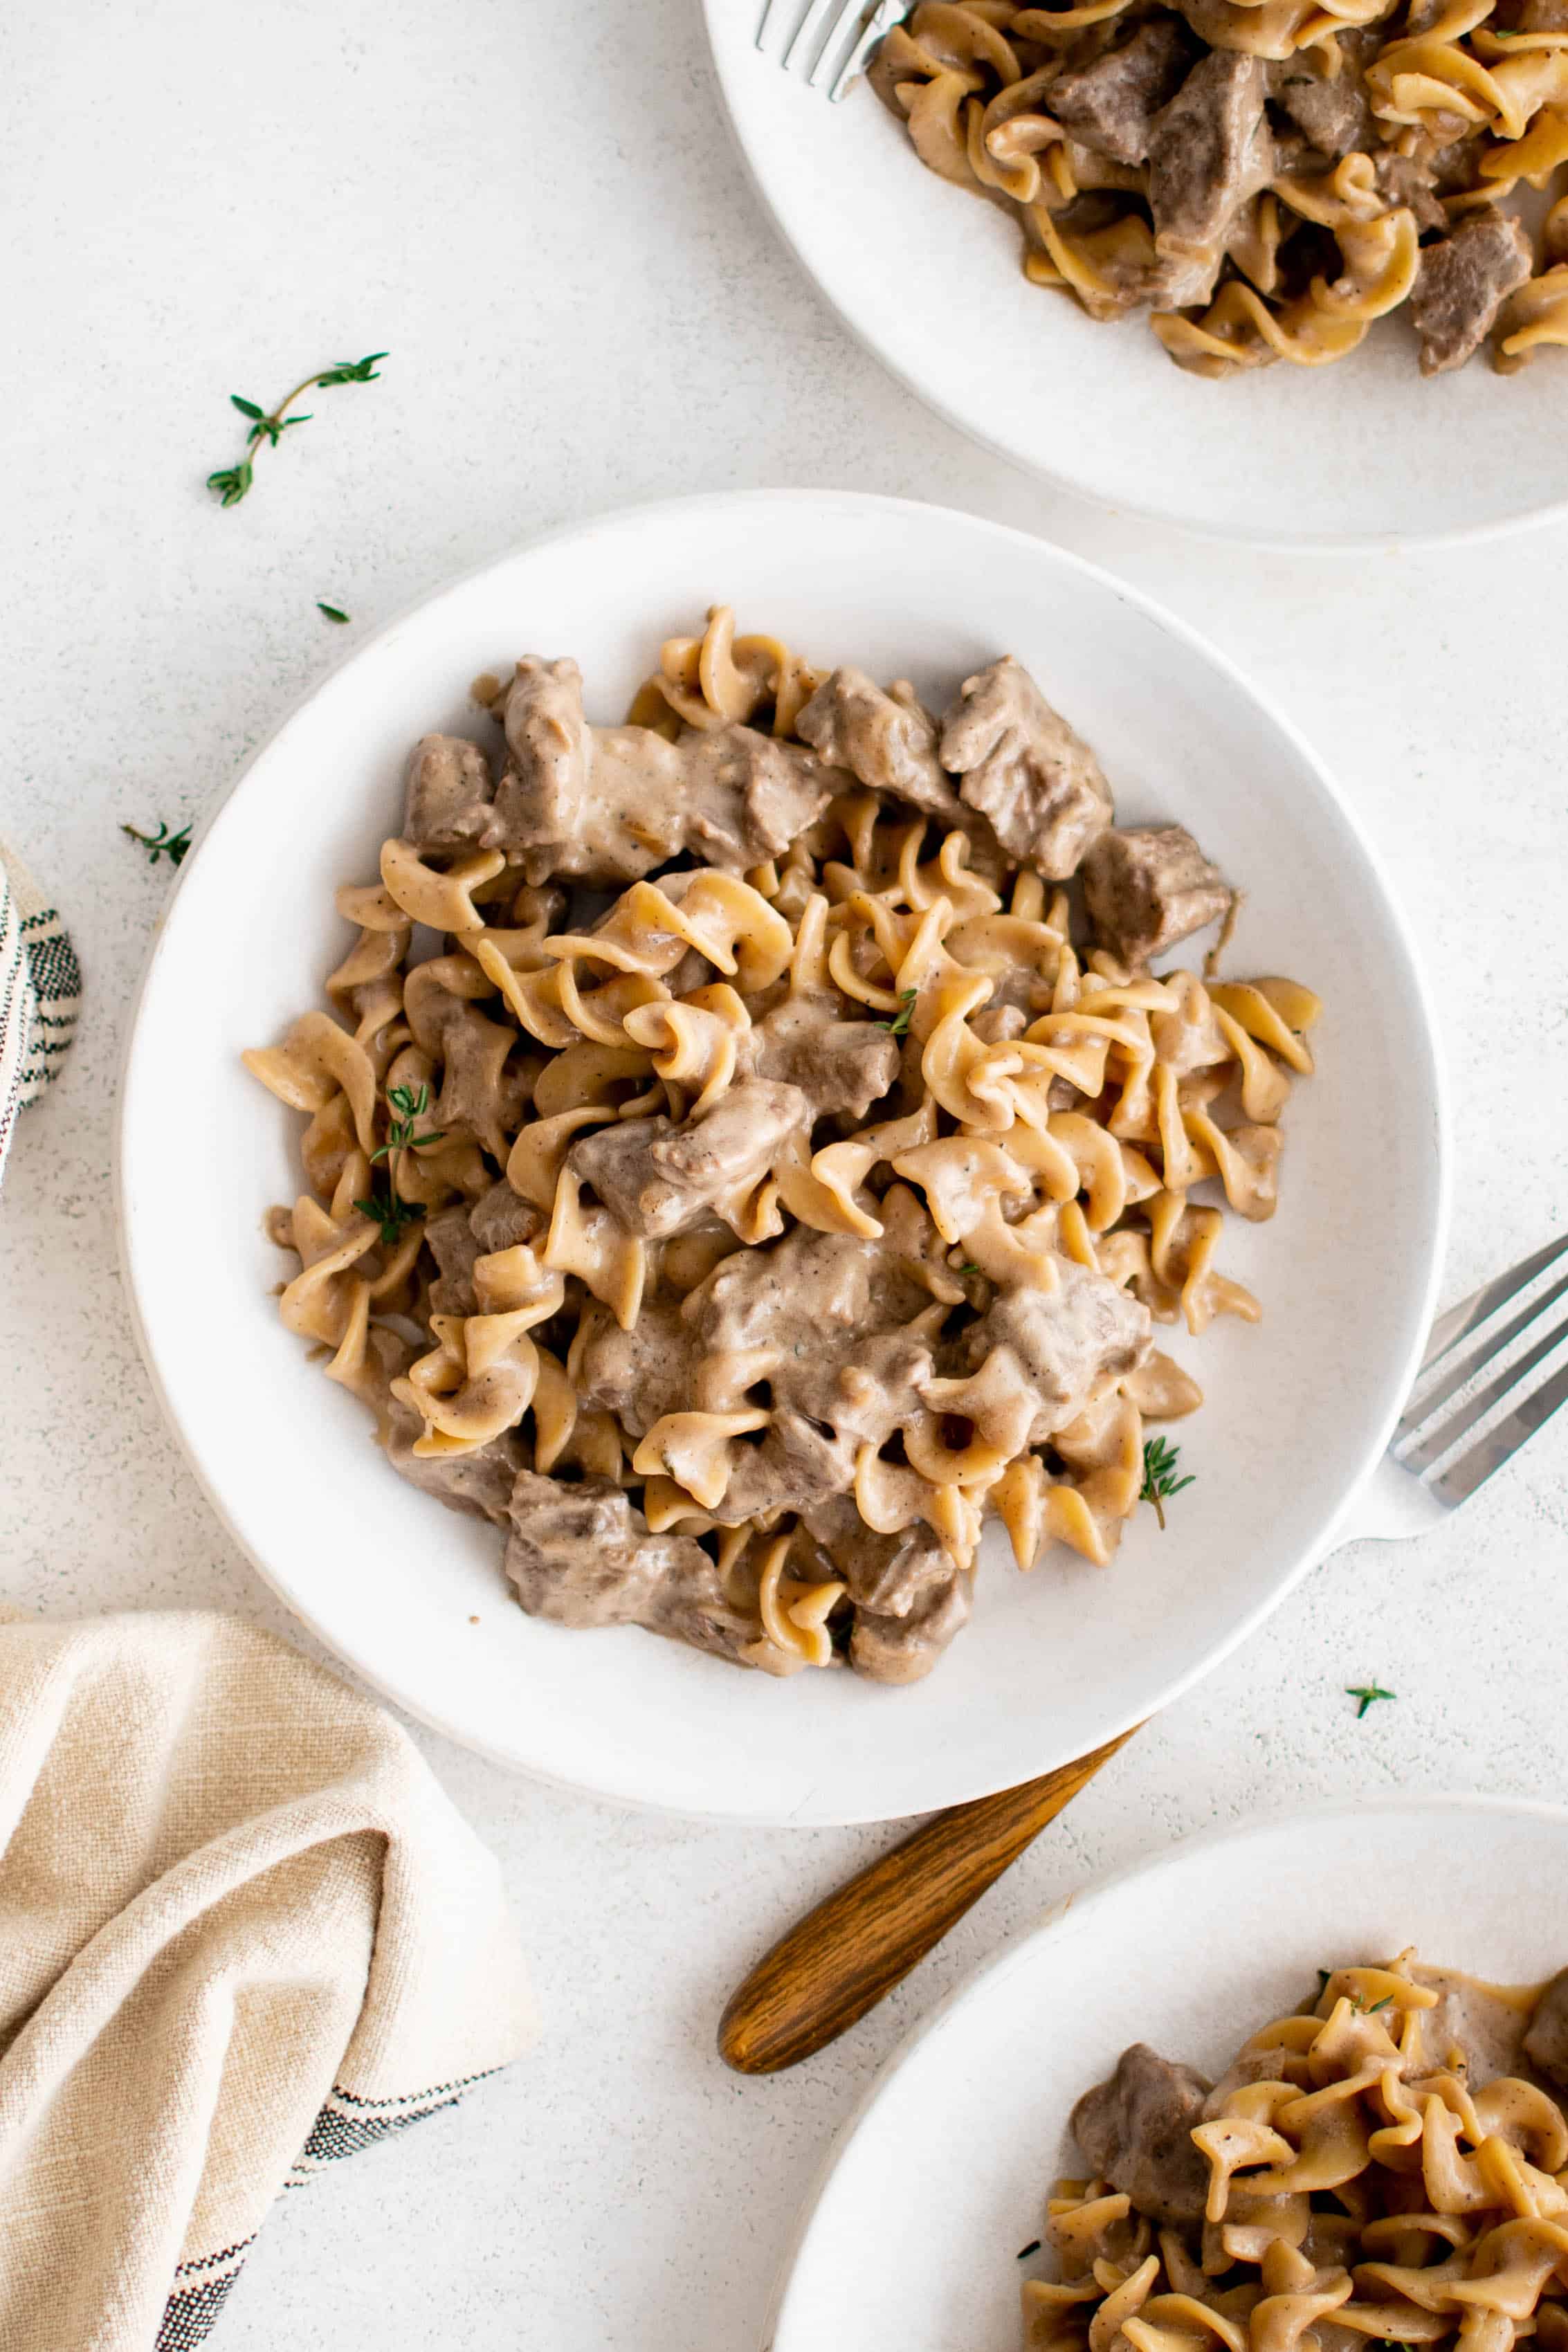 Overhead image of a white plate filled with chunks of meat and egg noodles smothered in a creamy brown gravy and garnished with fresh thyme.